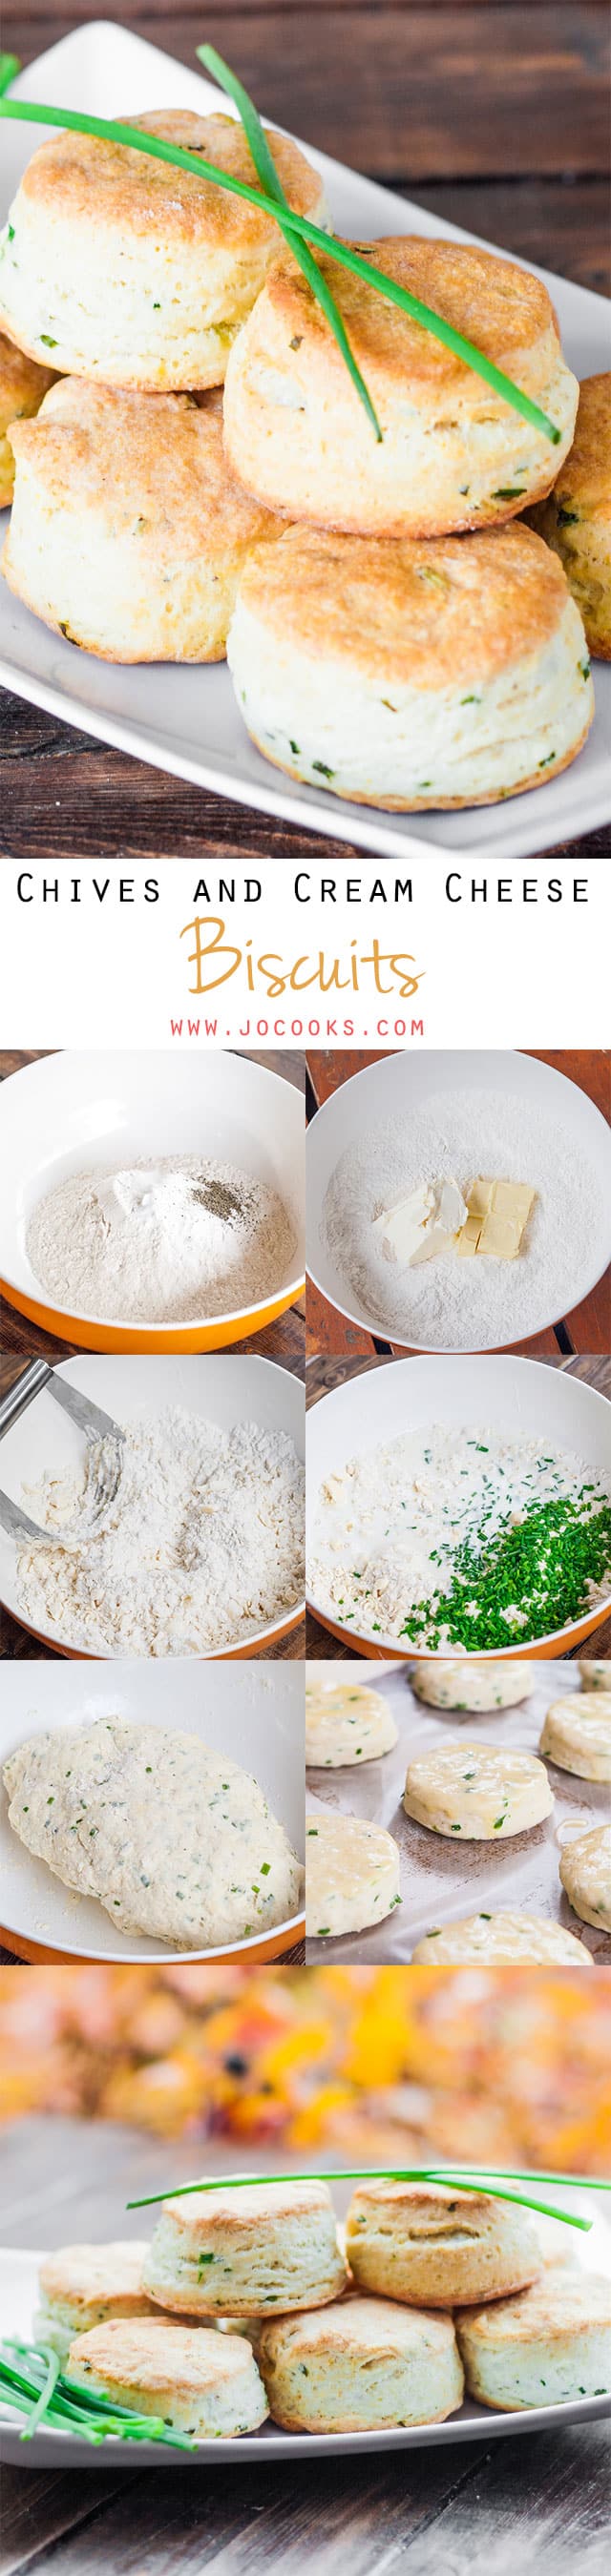 Step shots of how to make Chives and Cream Cheese Biscuits